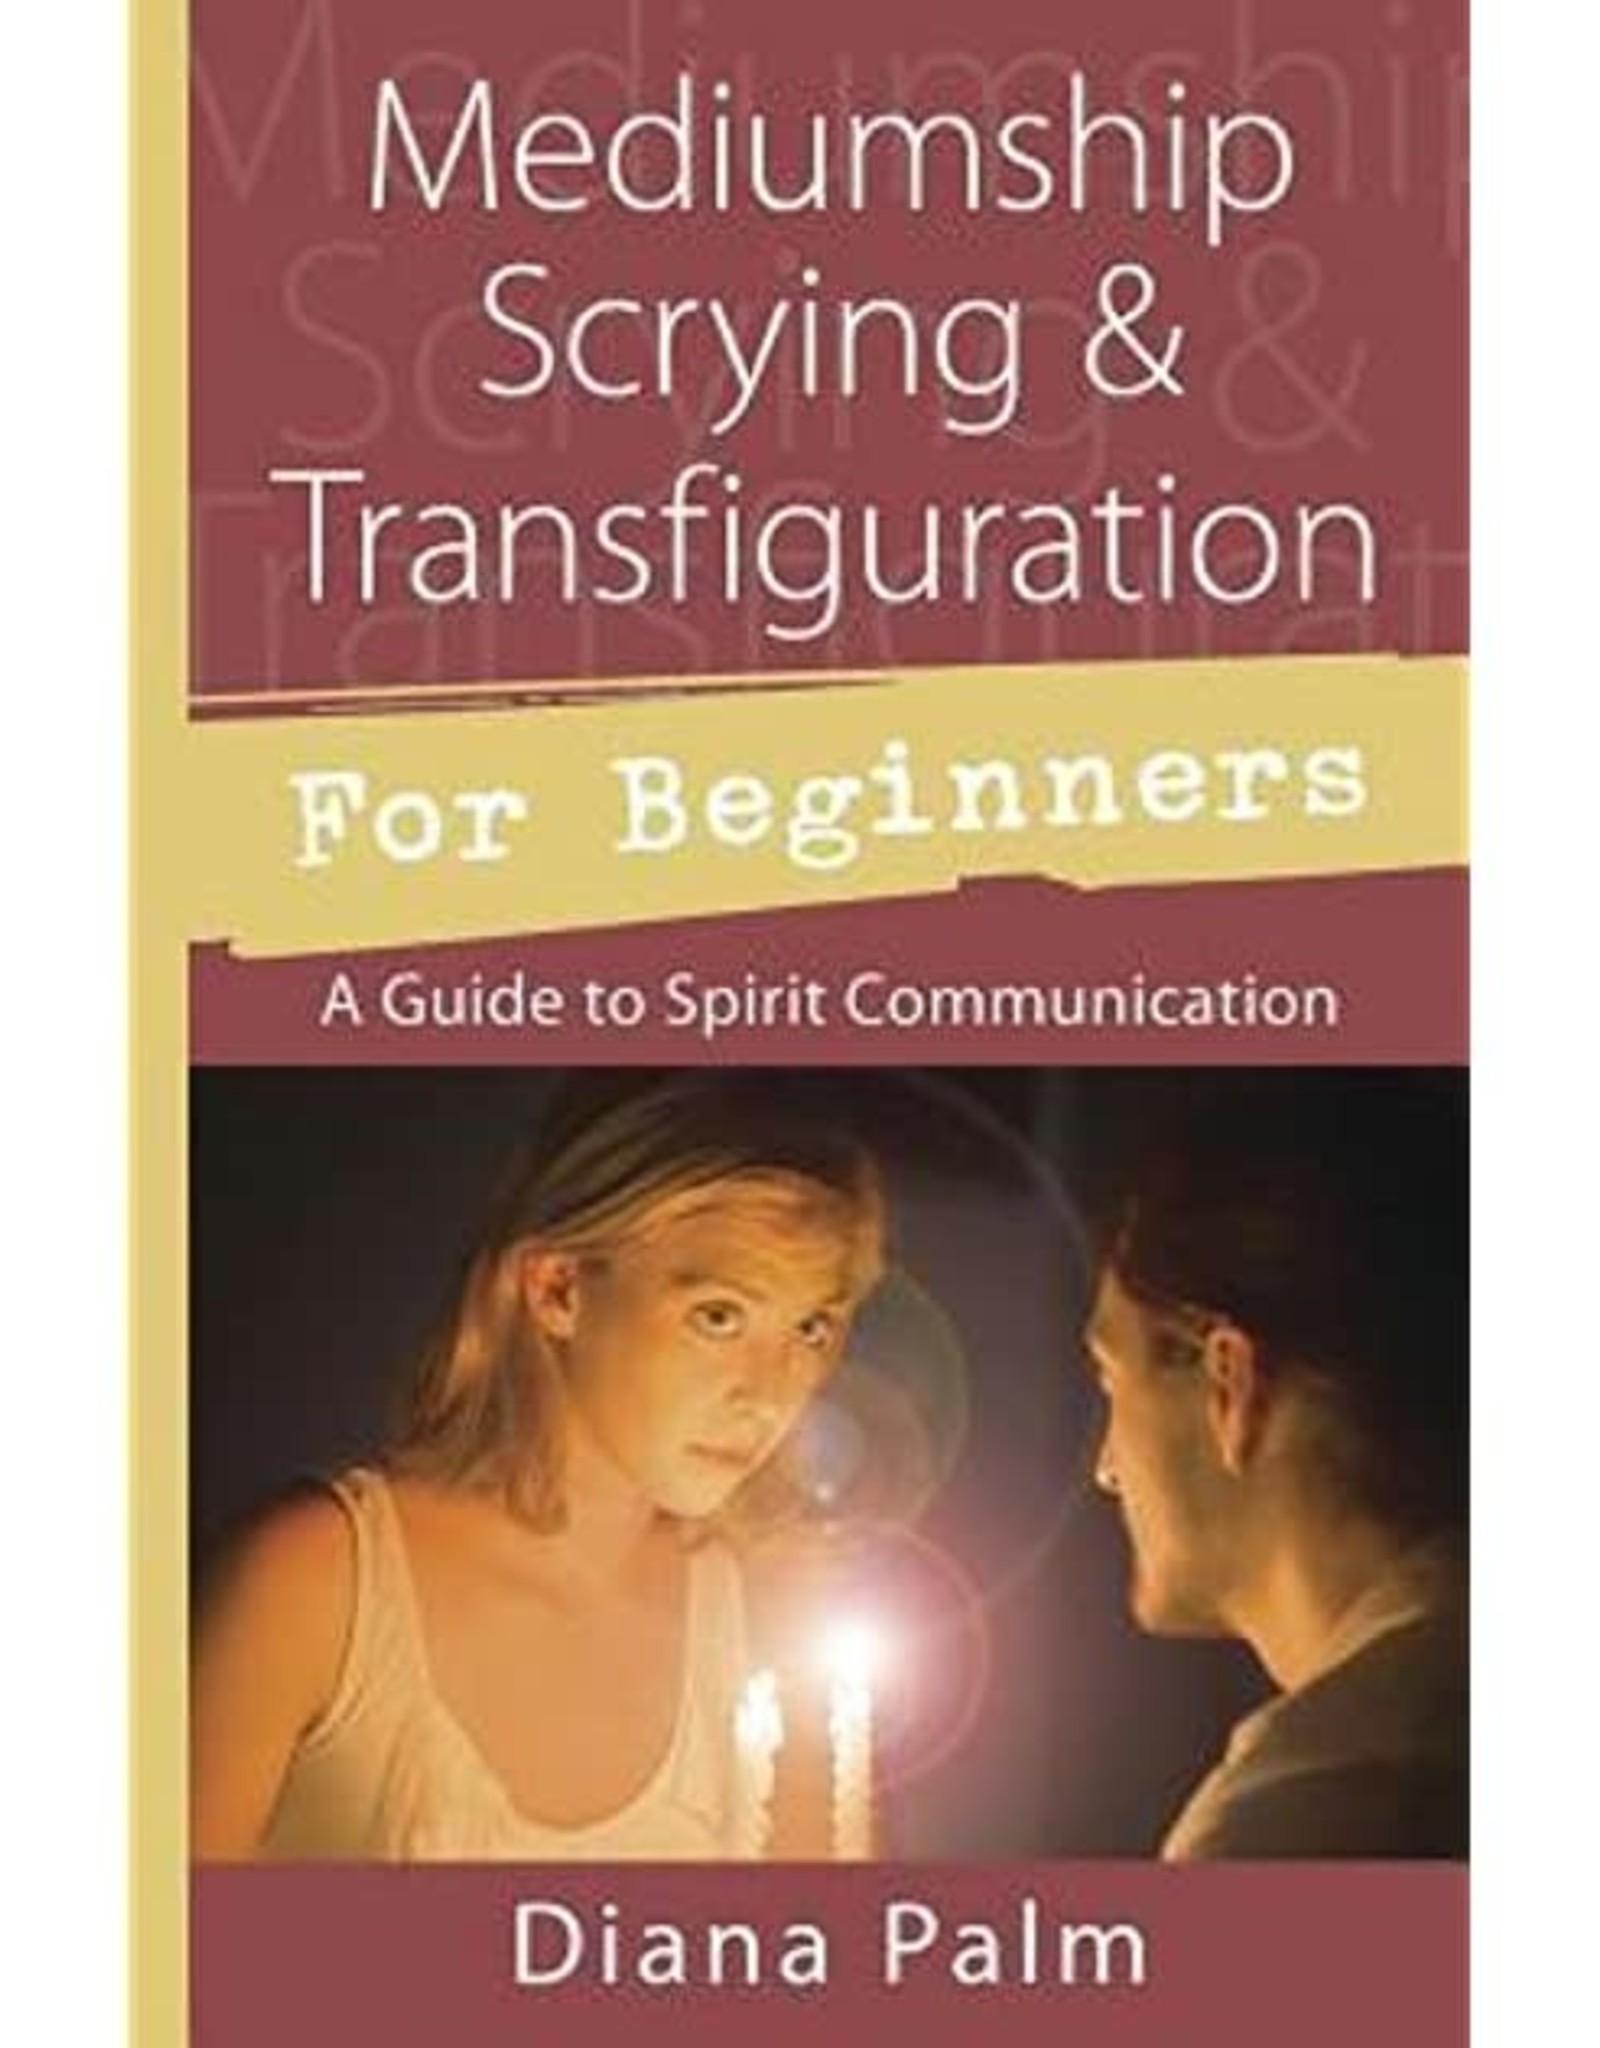 Diana Palm Mediumship Scrying & Transfiguration for Beginners by Diana Palm